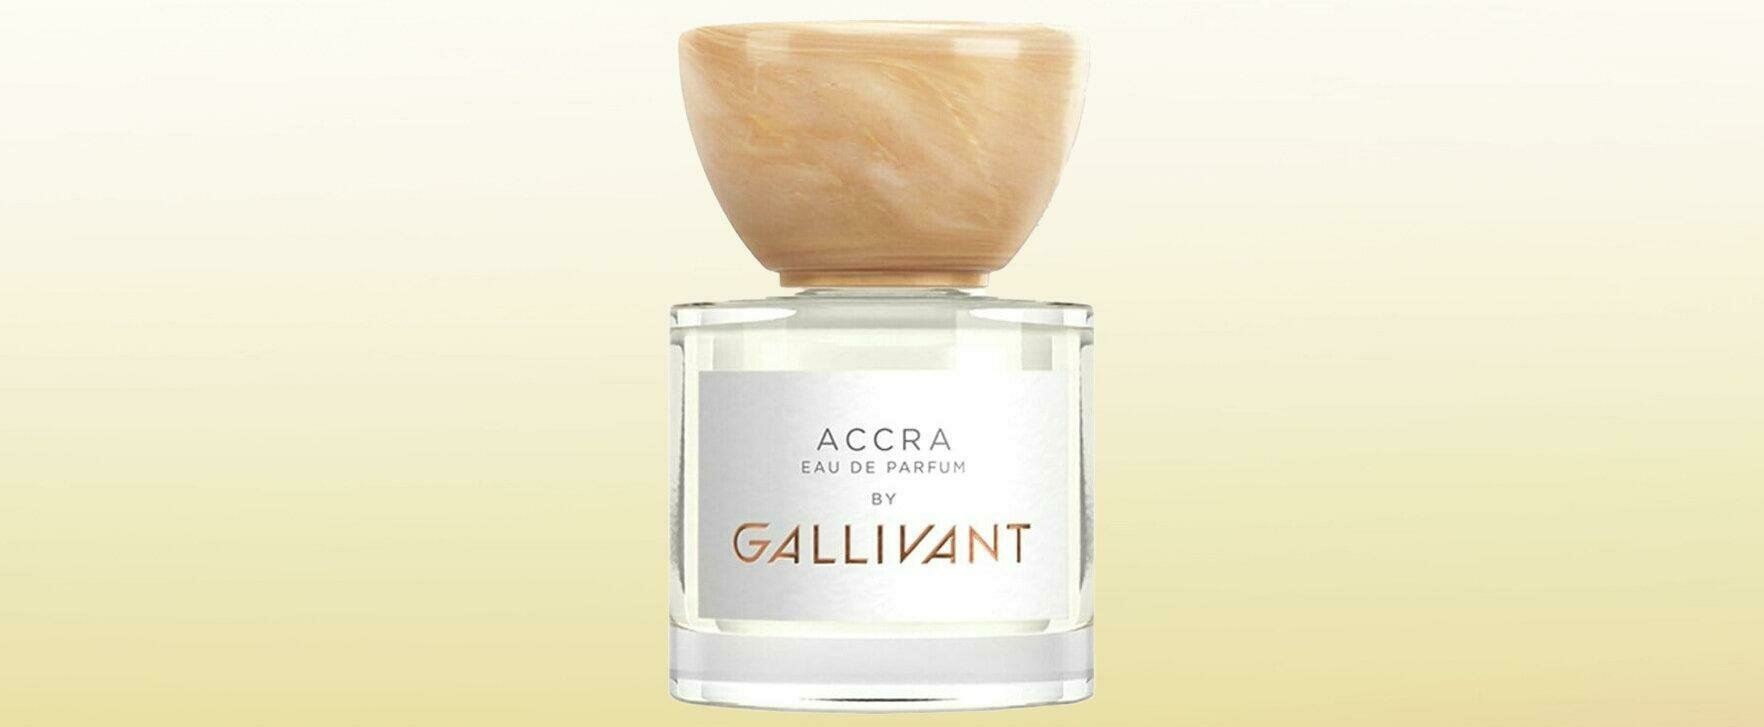 A fragrance journey to West Africa: Gallivant presents Accra